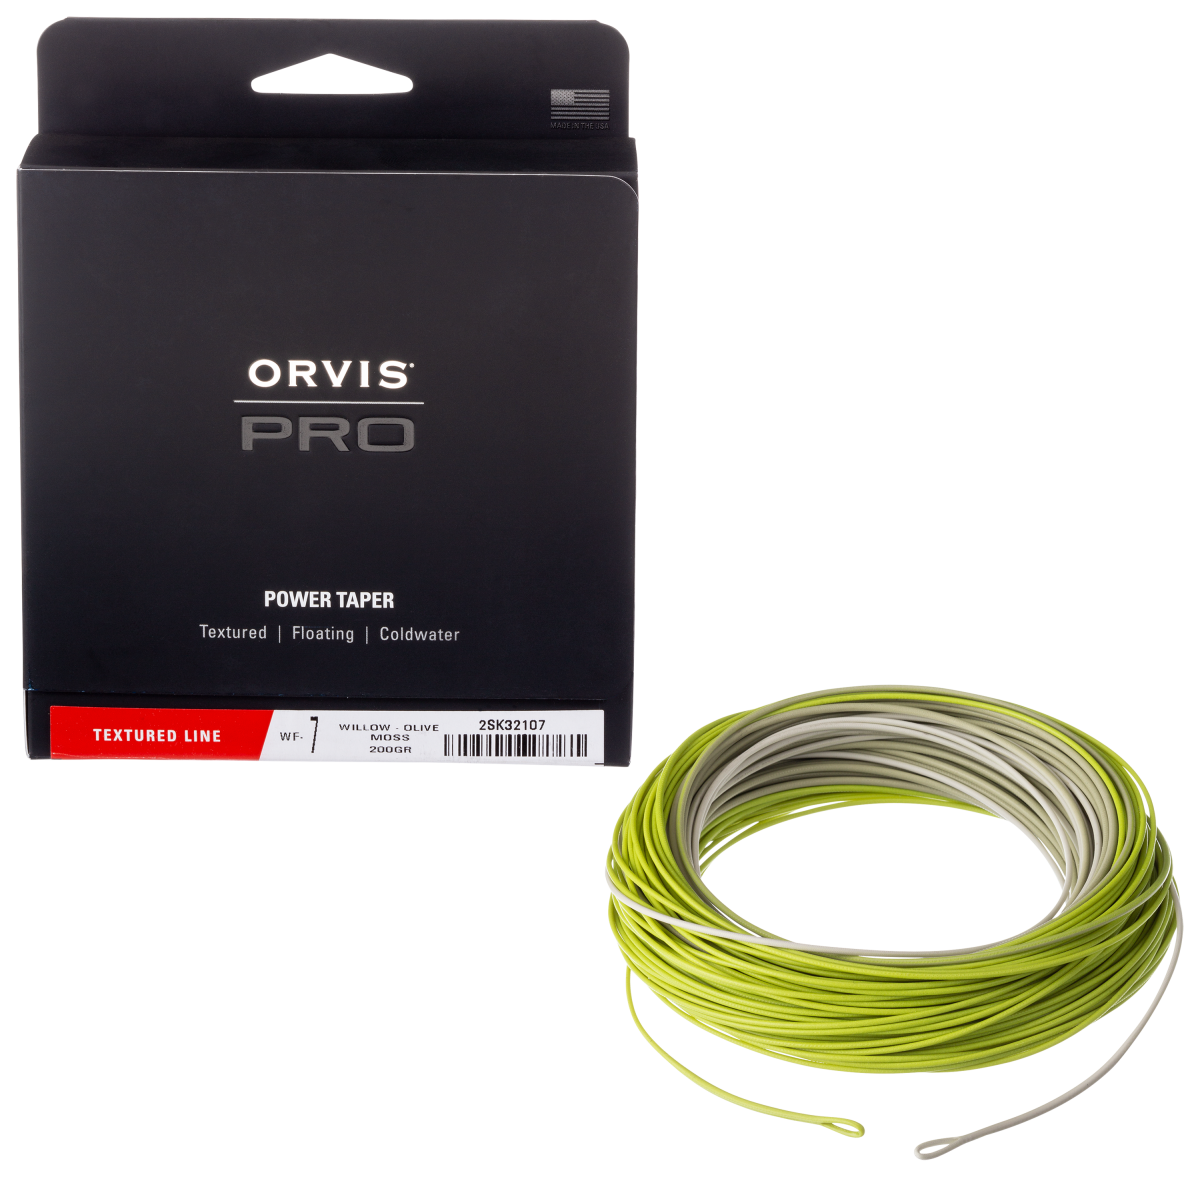 Orvis Pro Power Taper Textured Fly Line - Line Weight 4